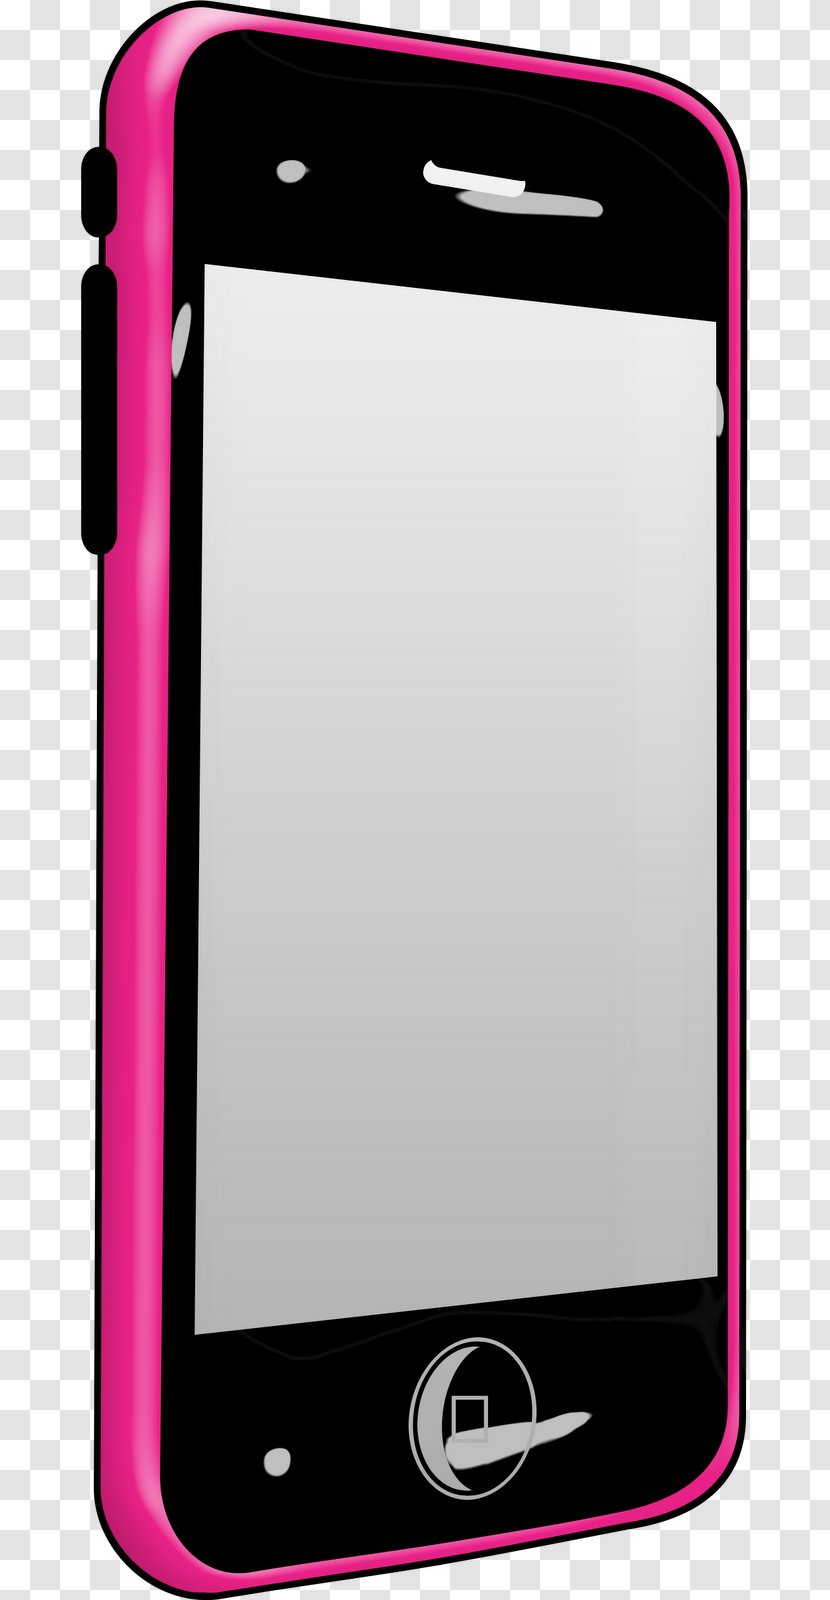 Feature Phone Mobile Accessories Handheld Devices Cellular Network - Phones - Pink Transparent PNG